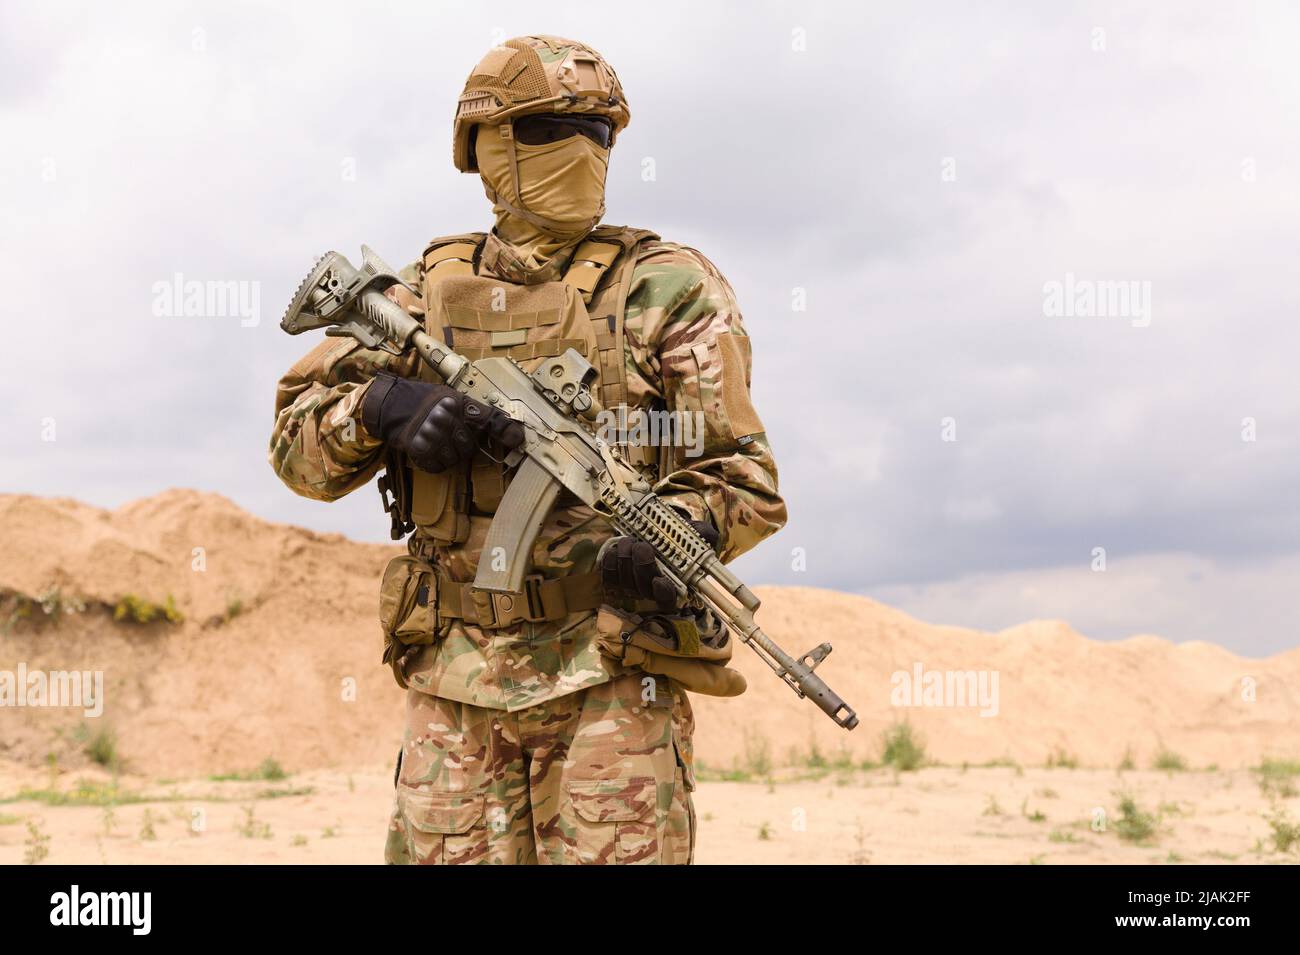 Armed special forces soldier in camouflage holding rifle. Stock Photo